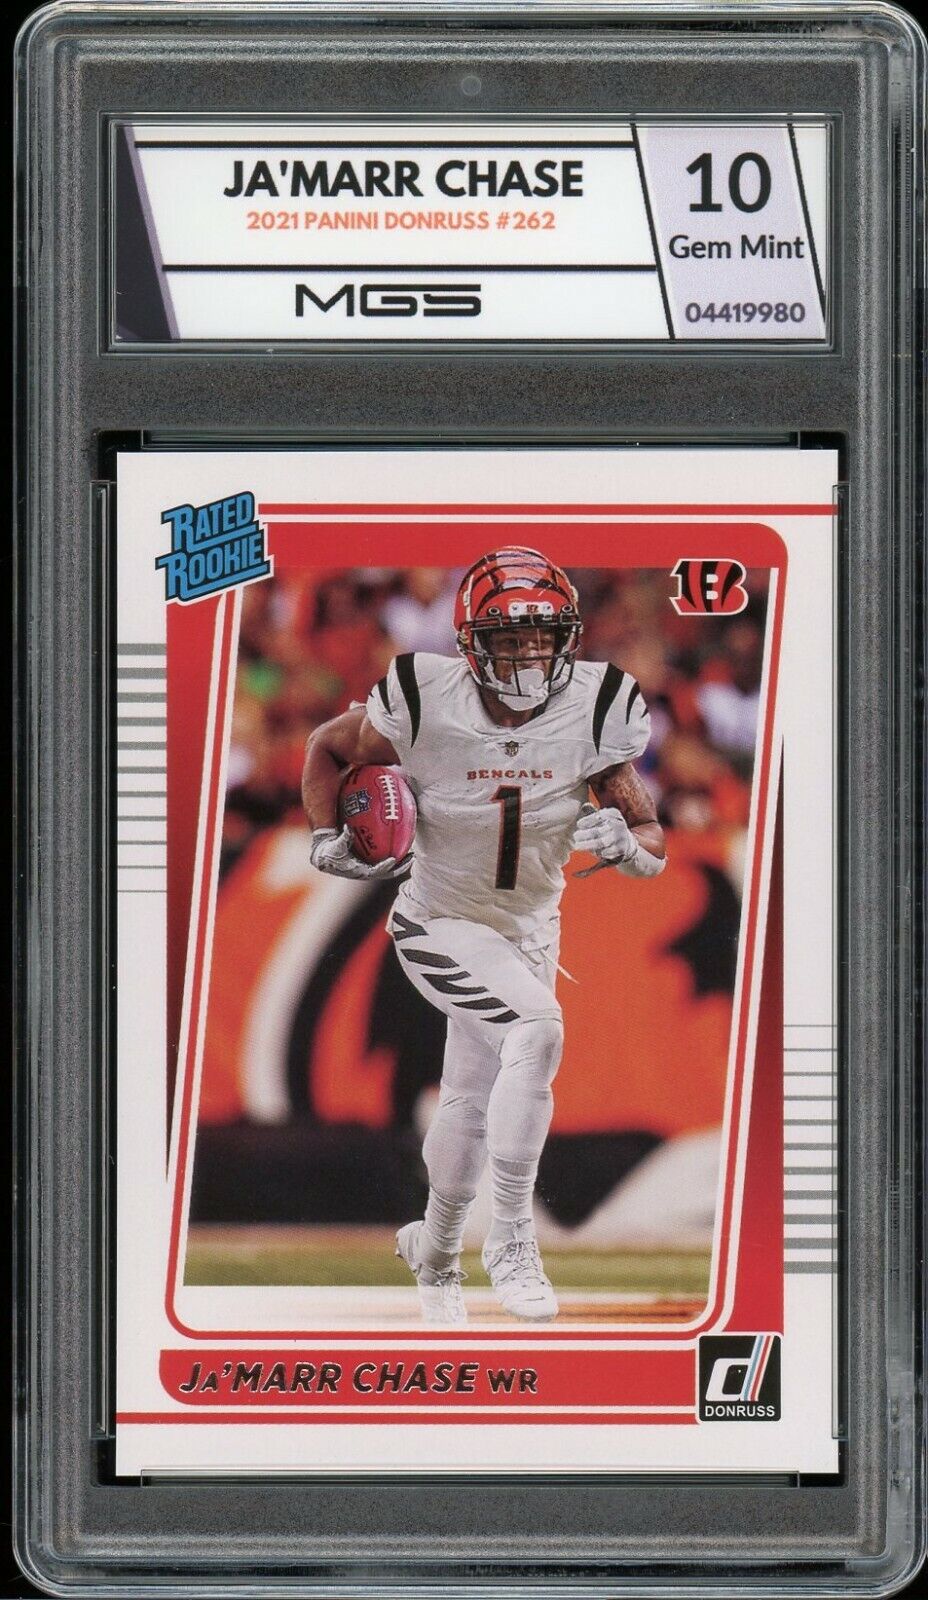 2021 Panini Donruss Ja\'Marr Chase MGS GRADED 10 GEM #262 RC 🔥 ROOKIE Bengals WR